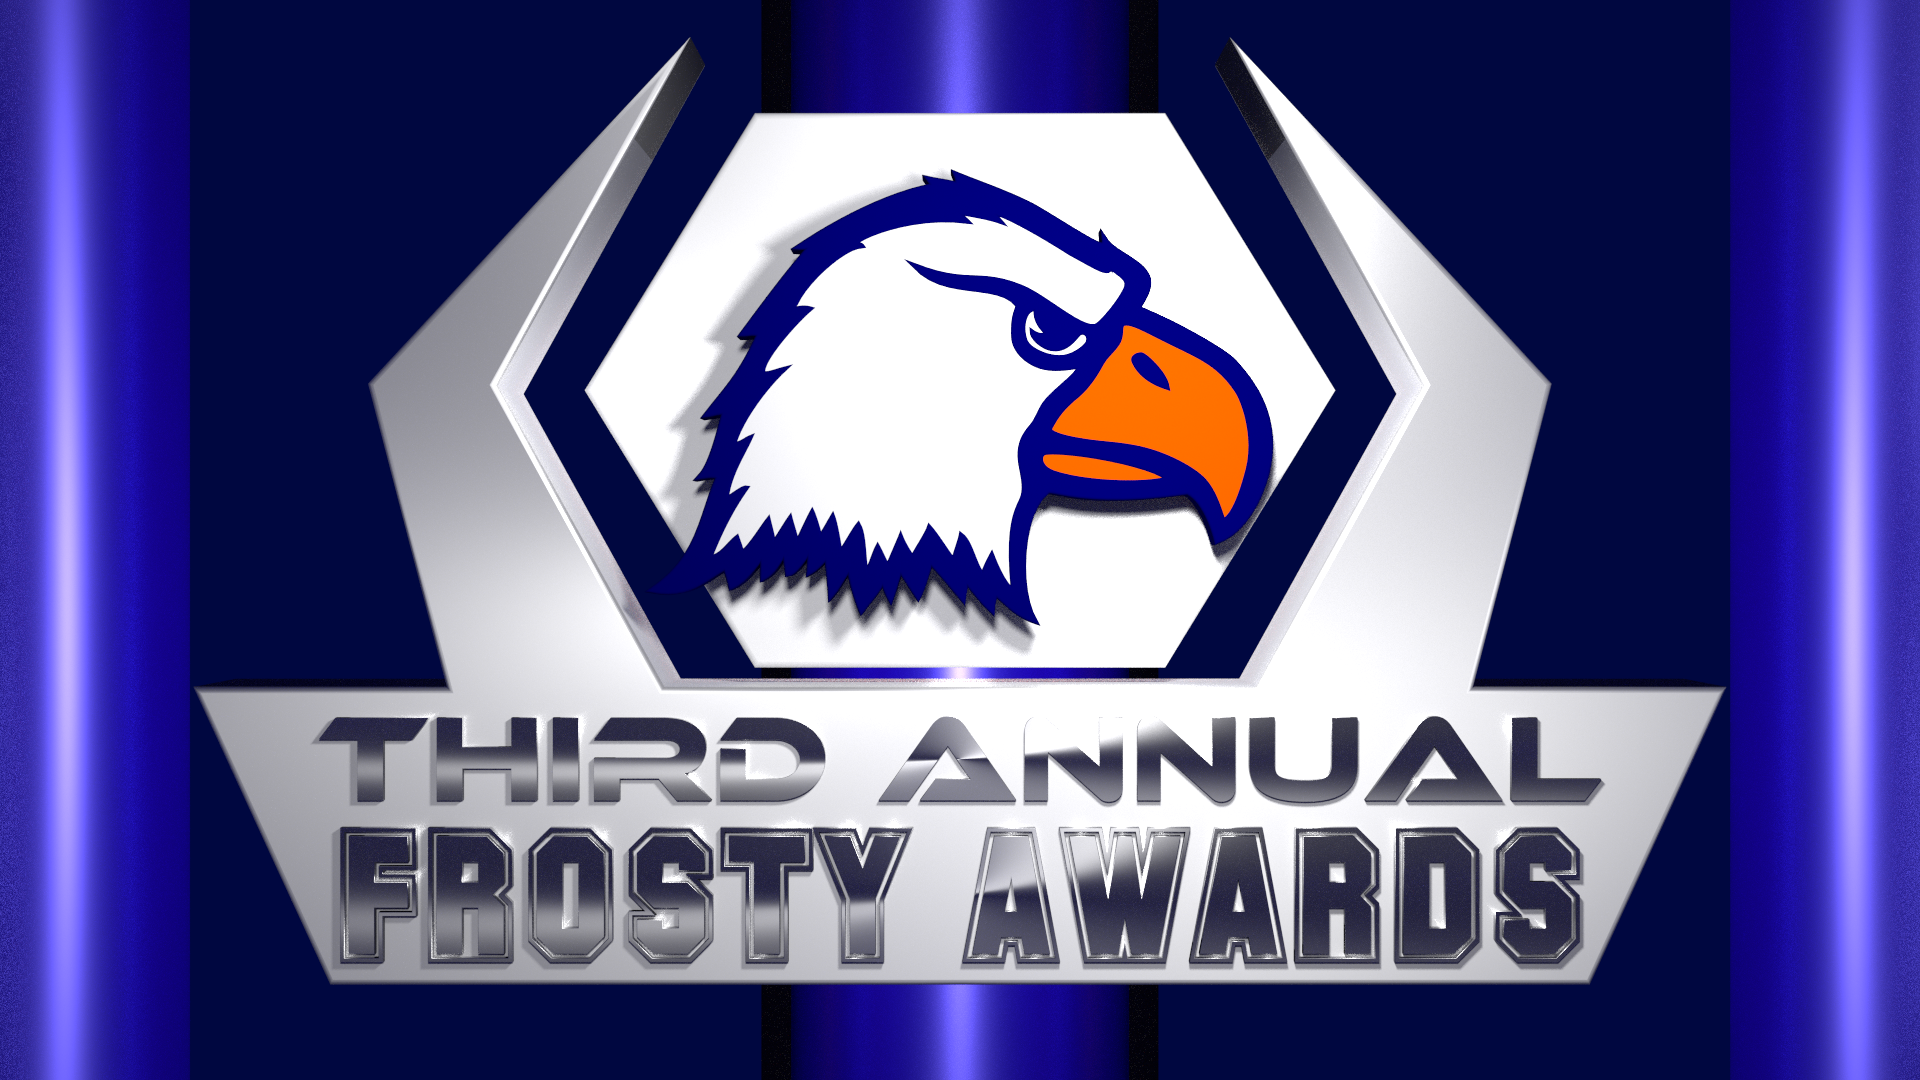 Athletic Department announces nominees and opens voting for Third Annual Frosty Awards